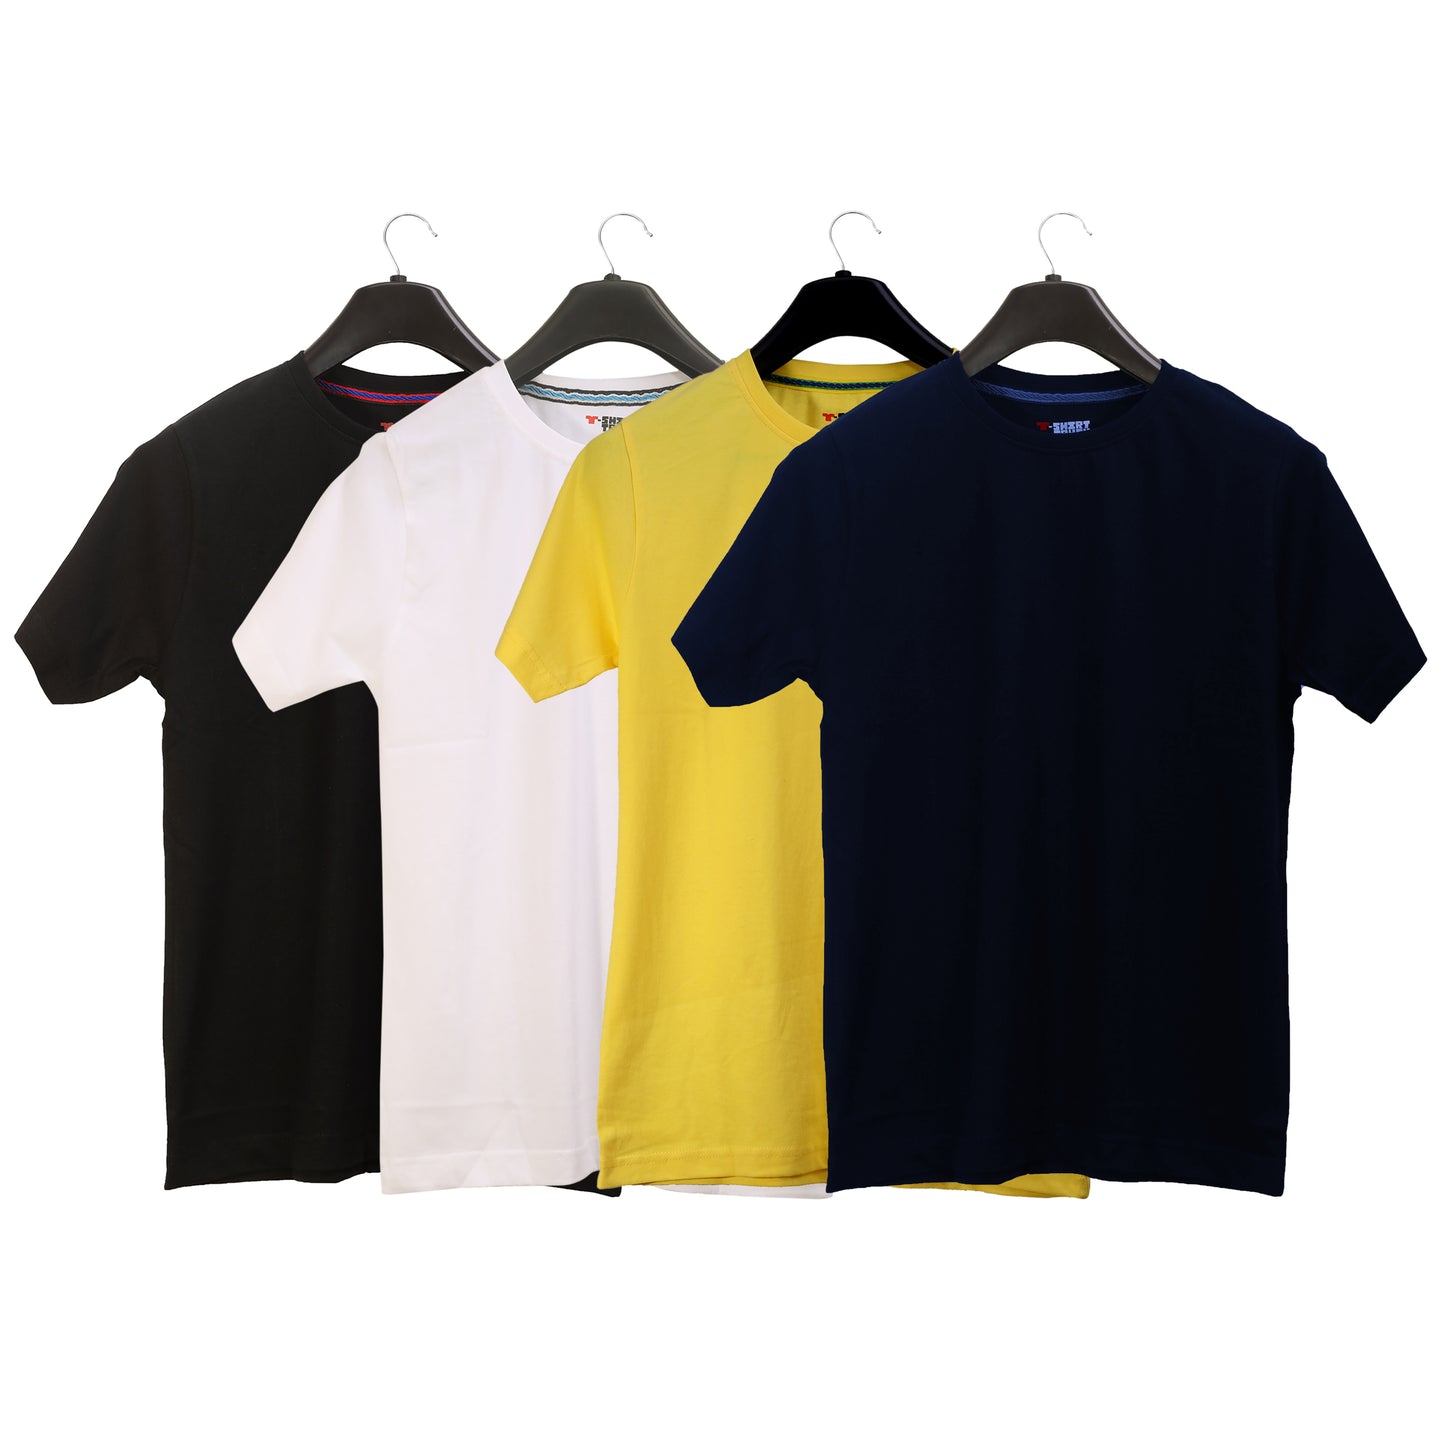 Unisex Round Neck Plain Solid Combo Pack of 4 T-shirts Black, White, Blue & Yellow